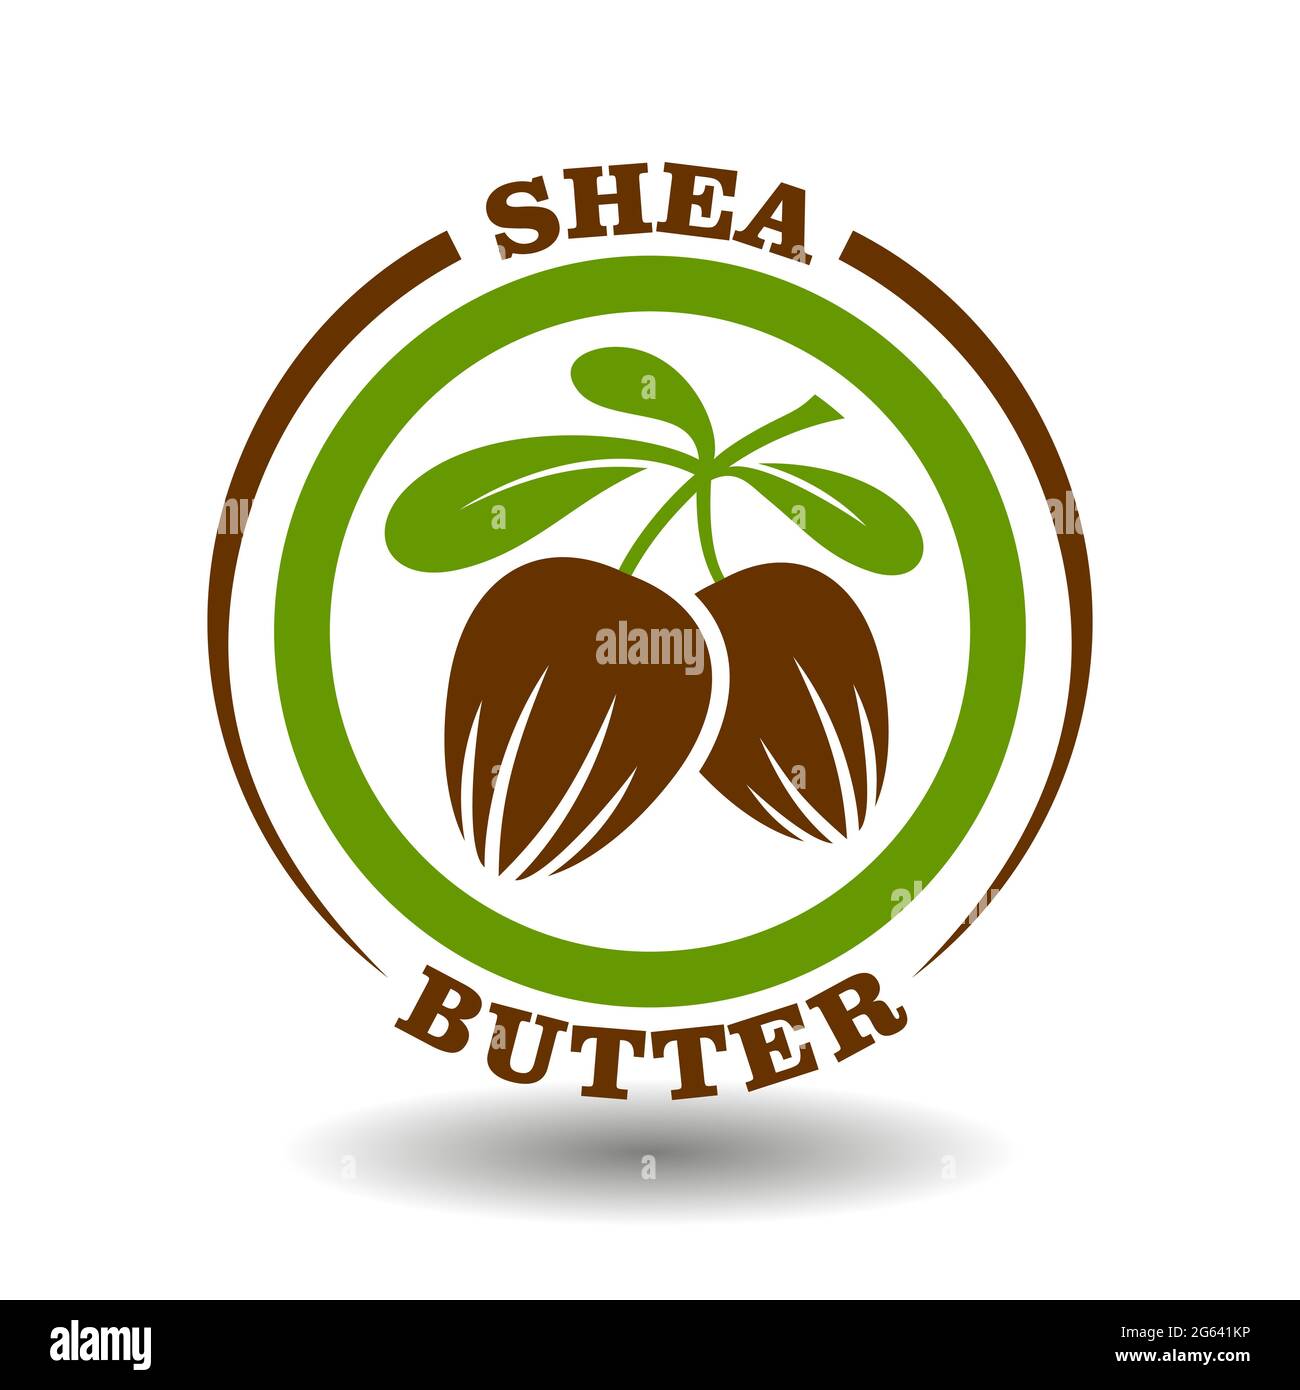 Vector circle logo Shea butter with green leaves branch and brown nuts symbol in round pictogram for organic cosmetics sign, natural food labeling tag Stock Vector